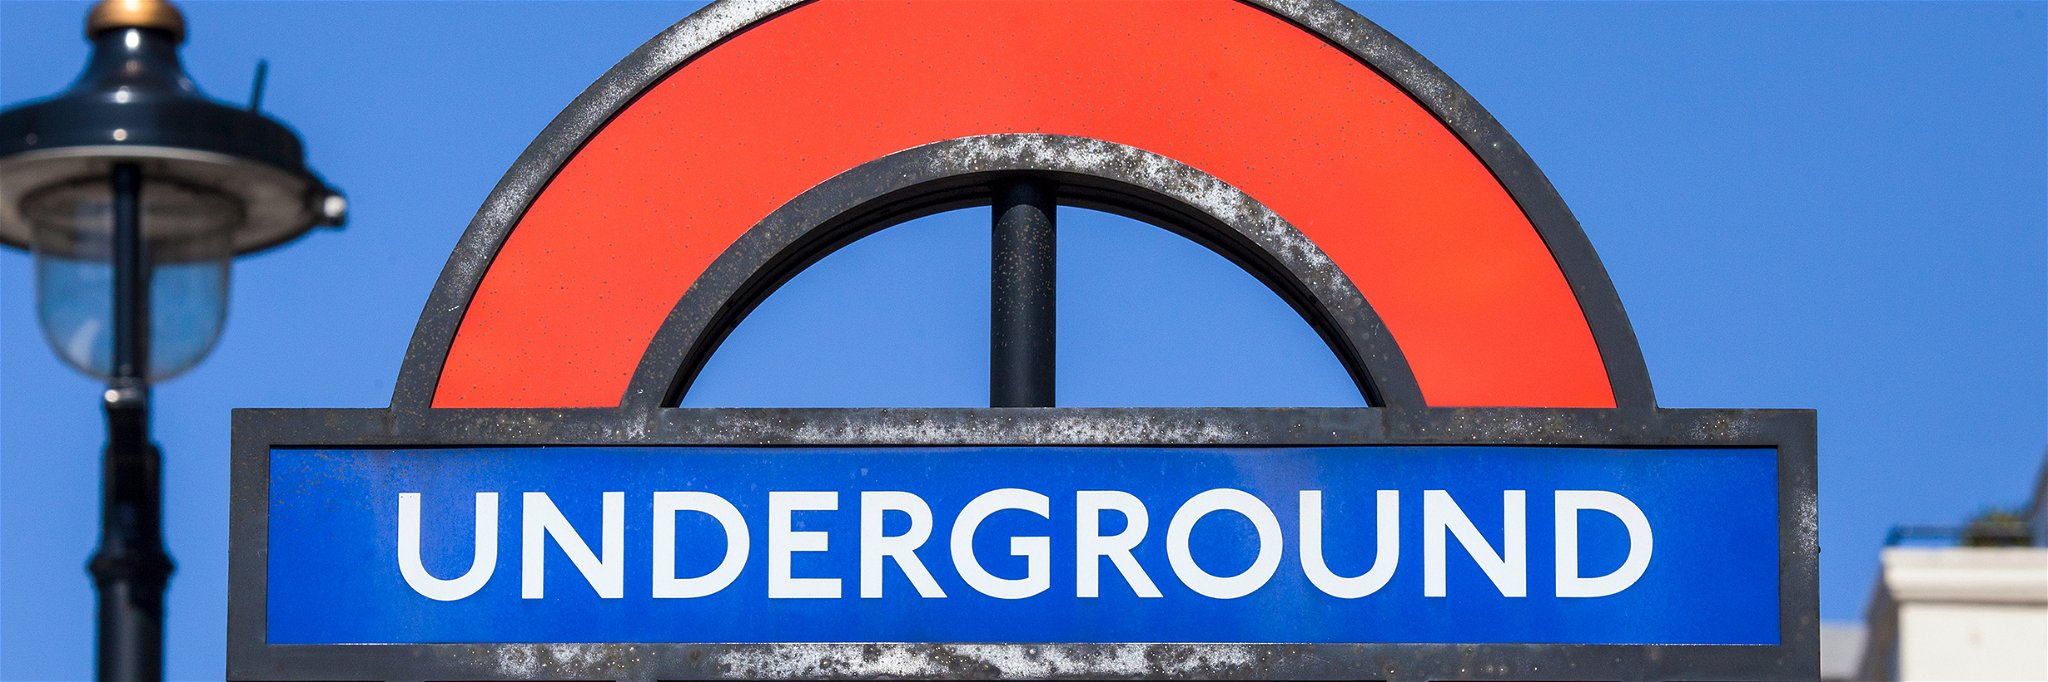 Some of Tube lines will be completely closed.